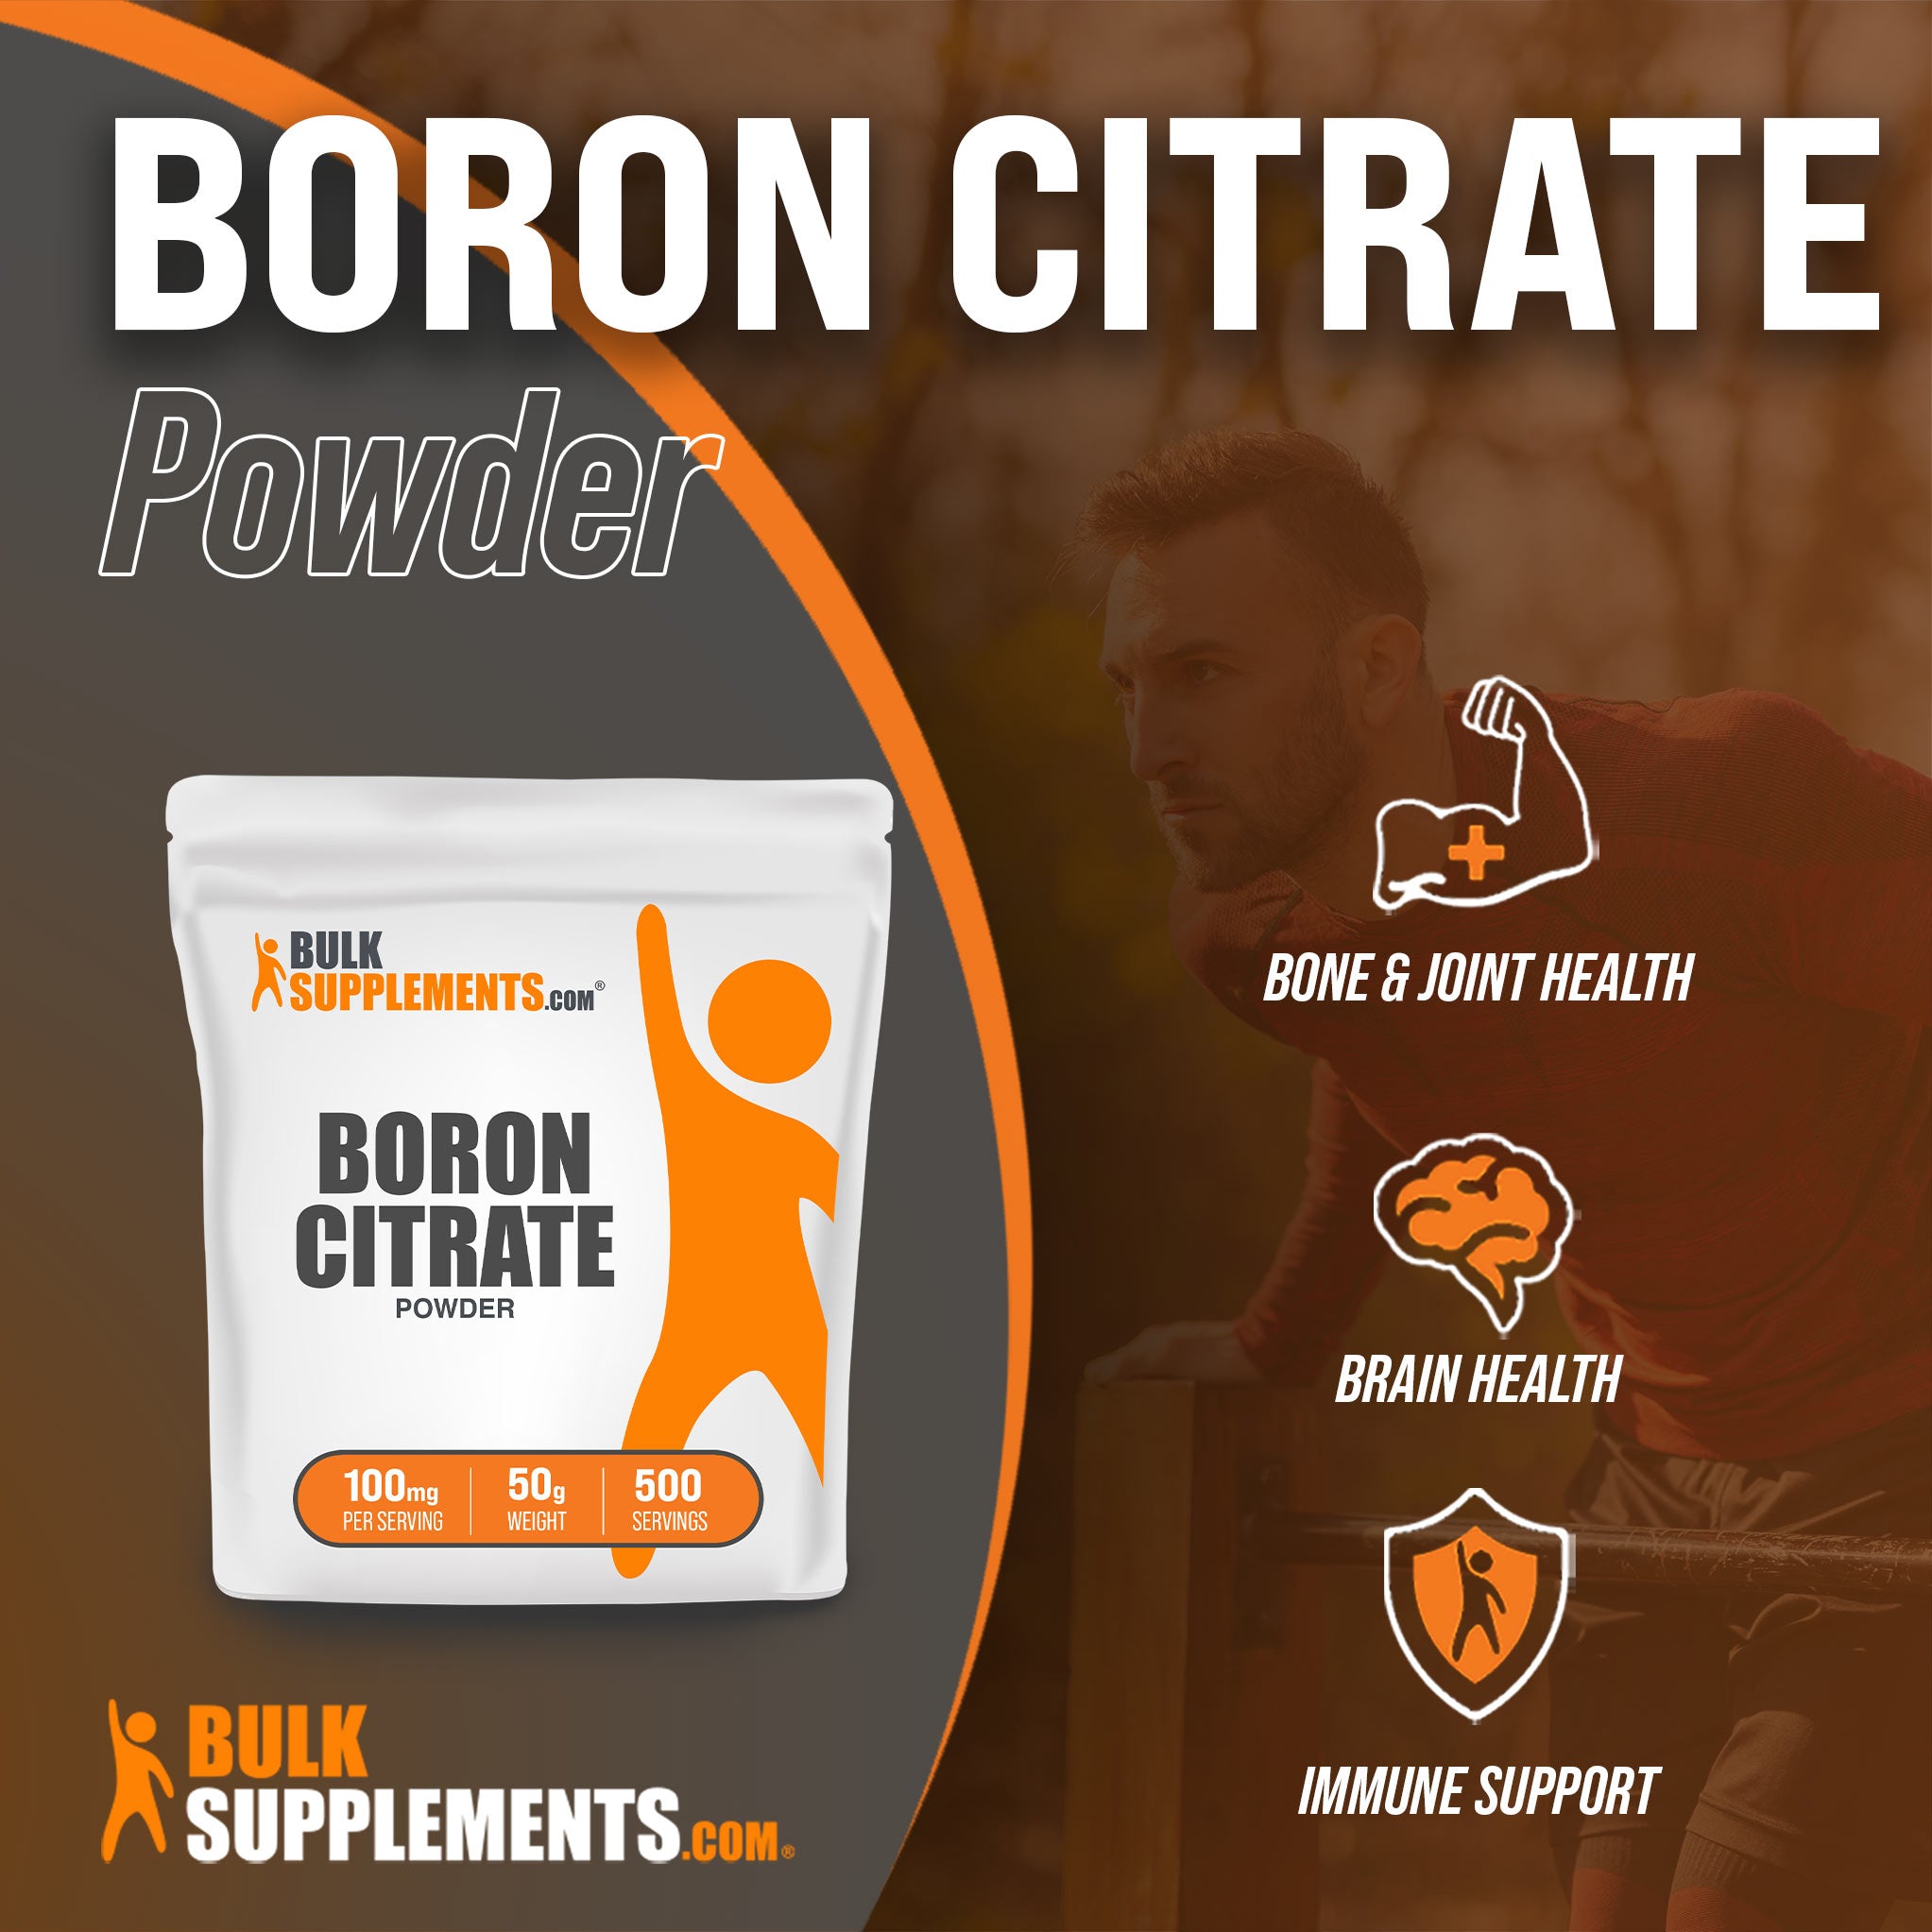 50g of Boron Citrate: 100mg Servings